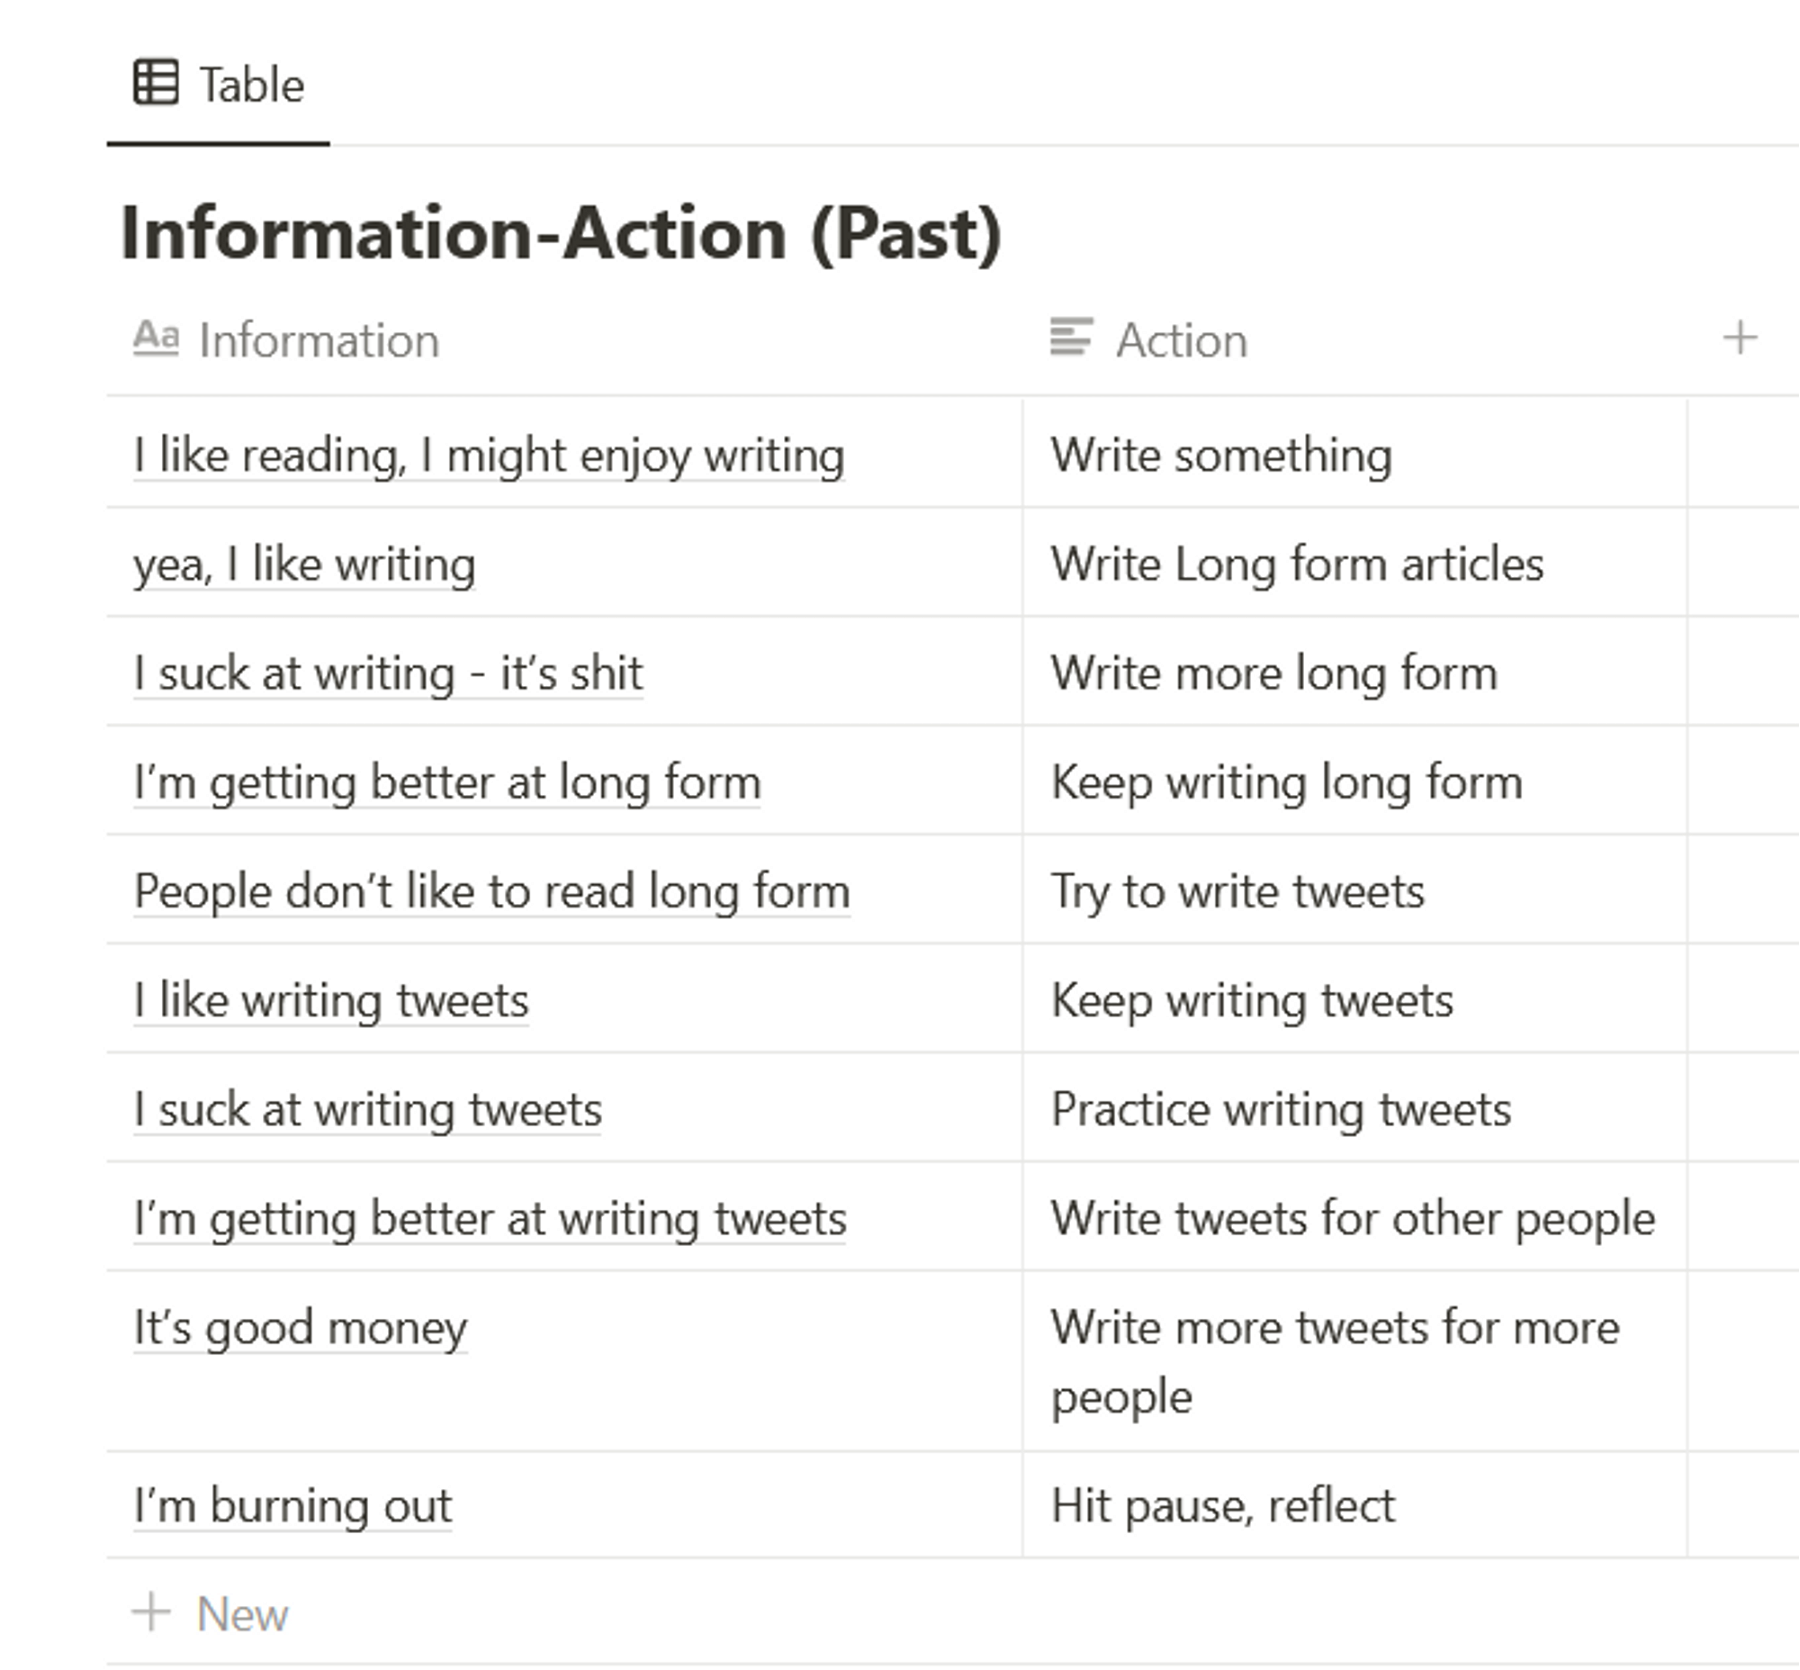 The Information - Action Cycle